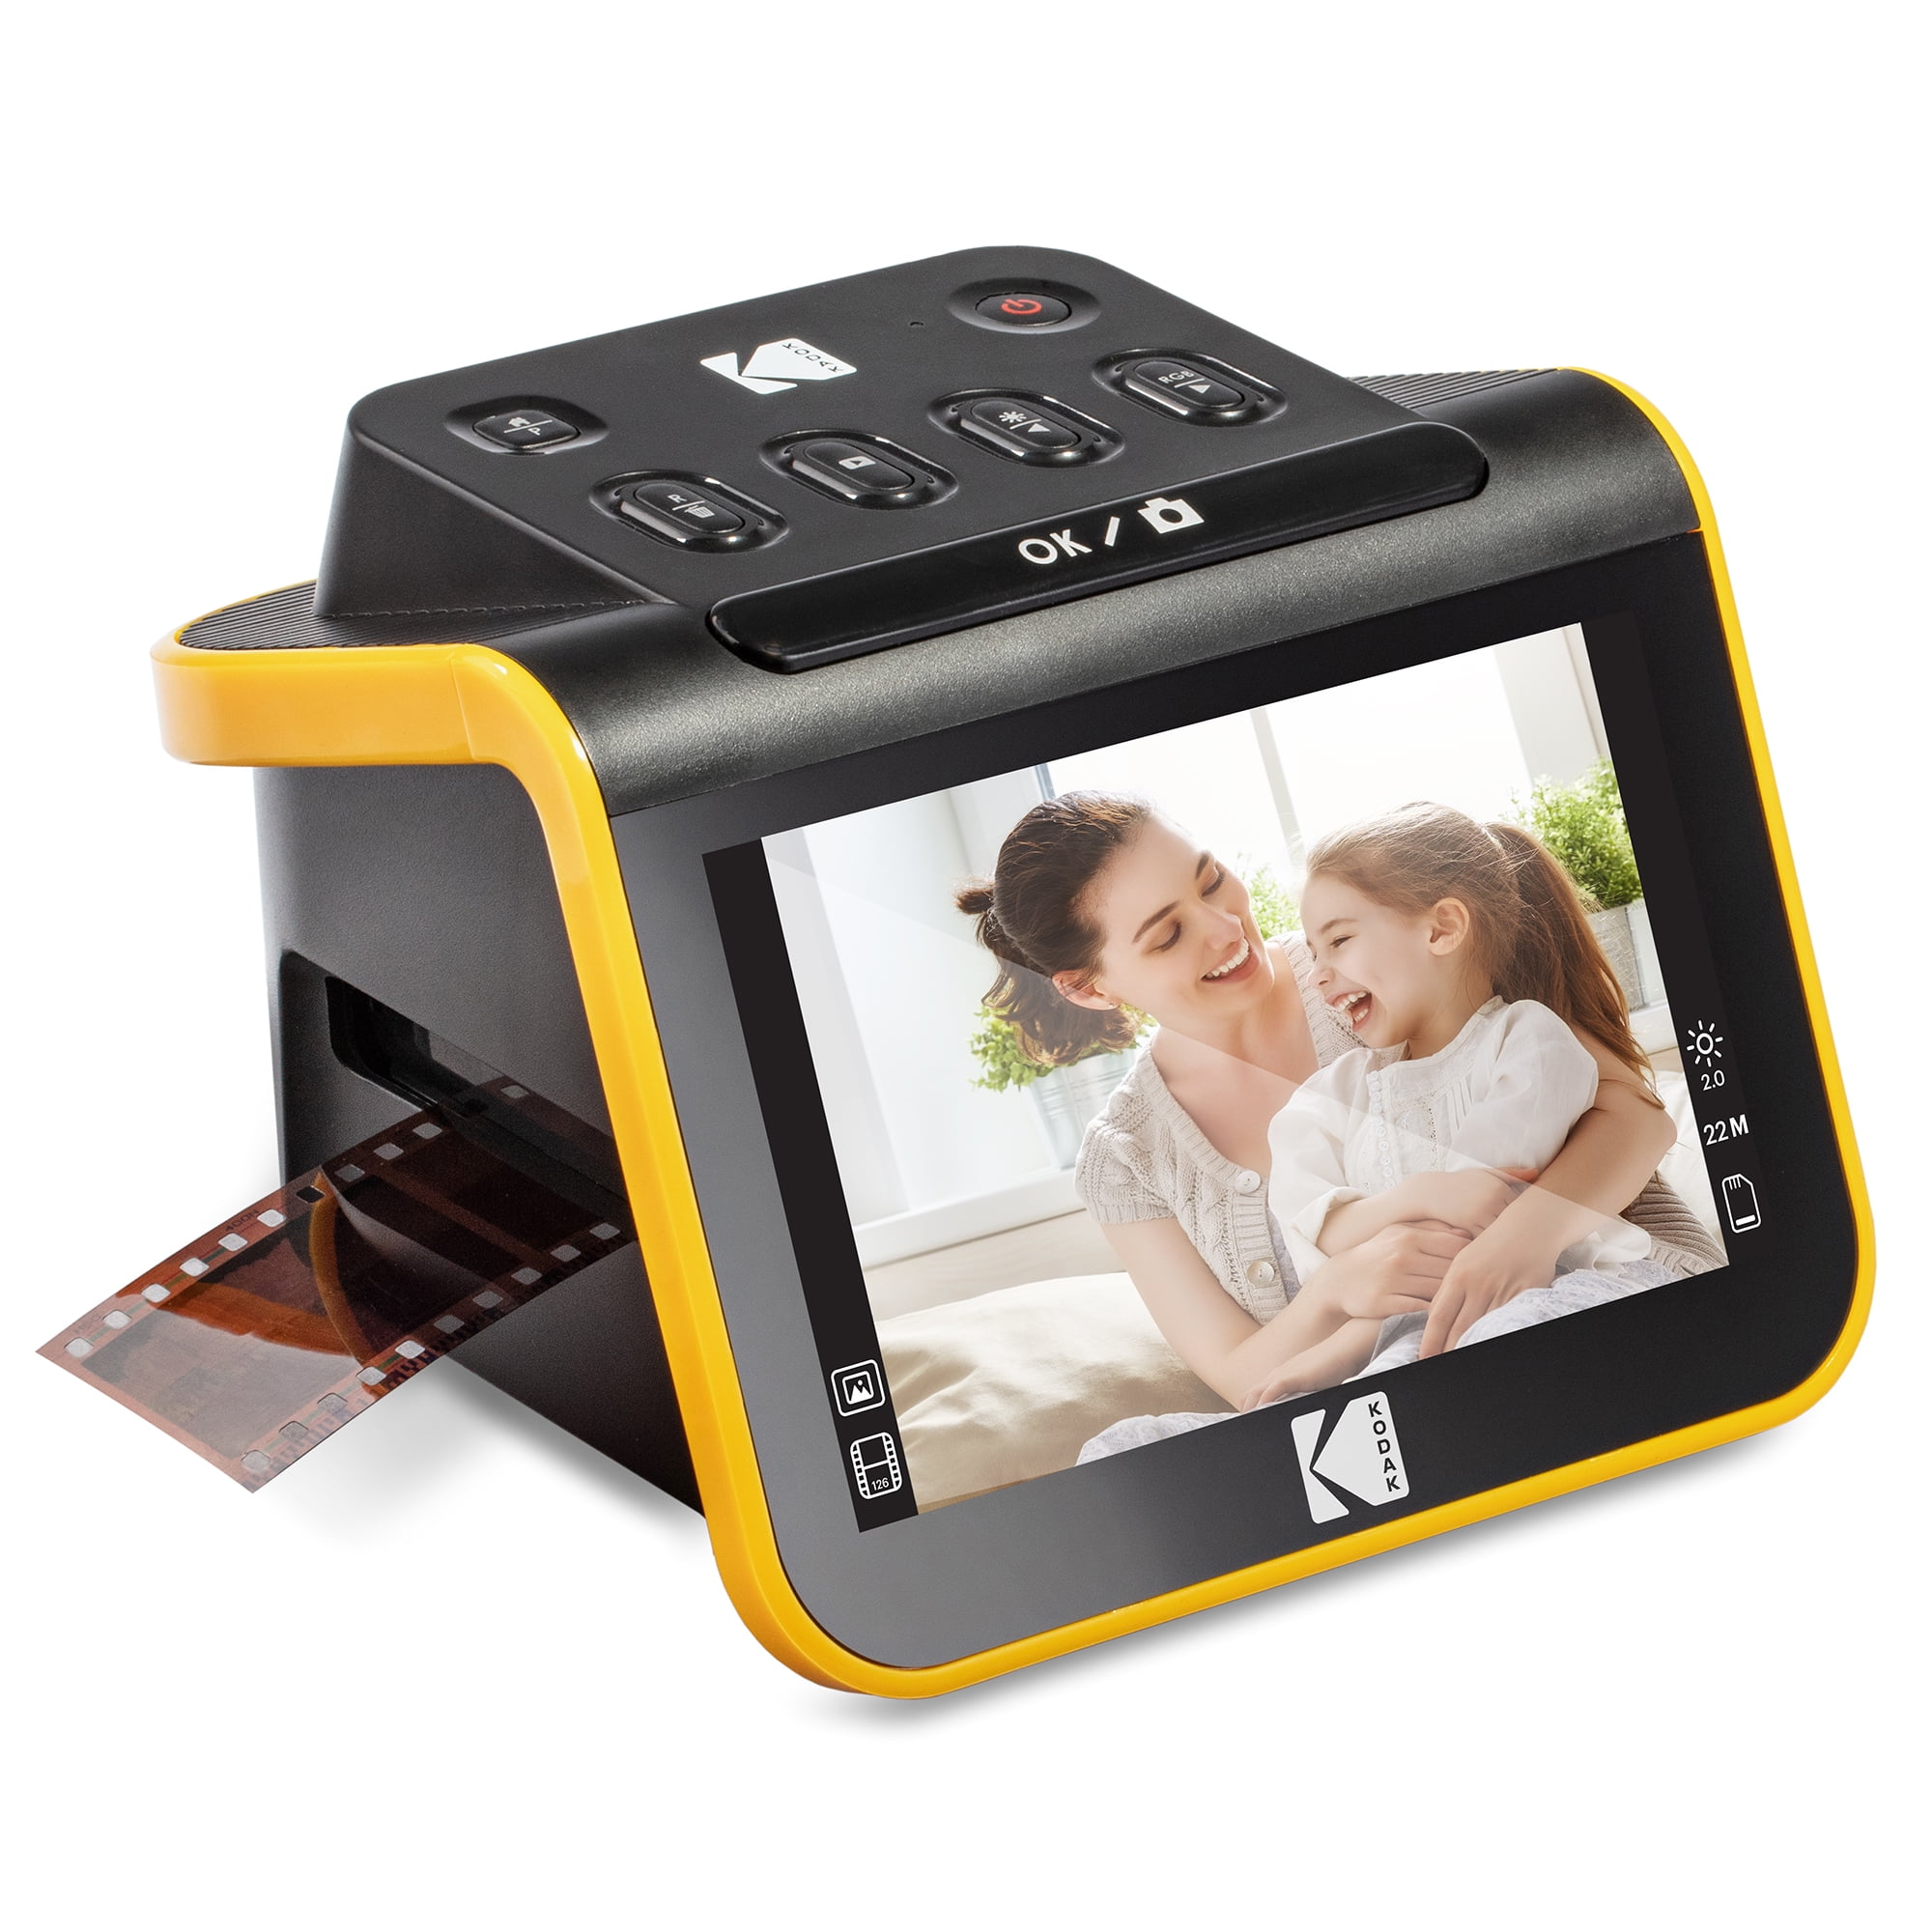 & Film Scanner w/ 4 GB SD Card & Photo Software ClearClick 10 MP Photo Slide 